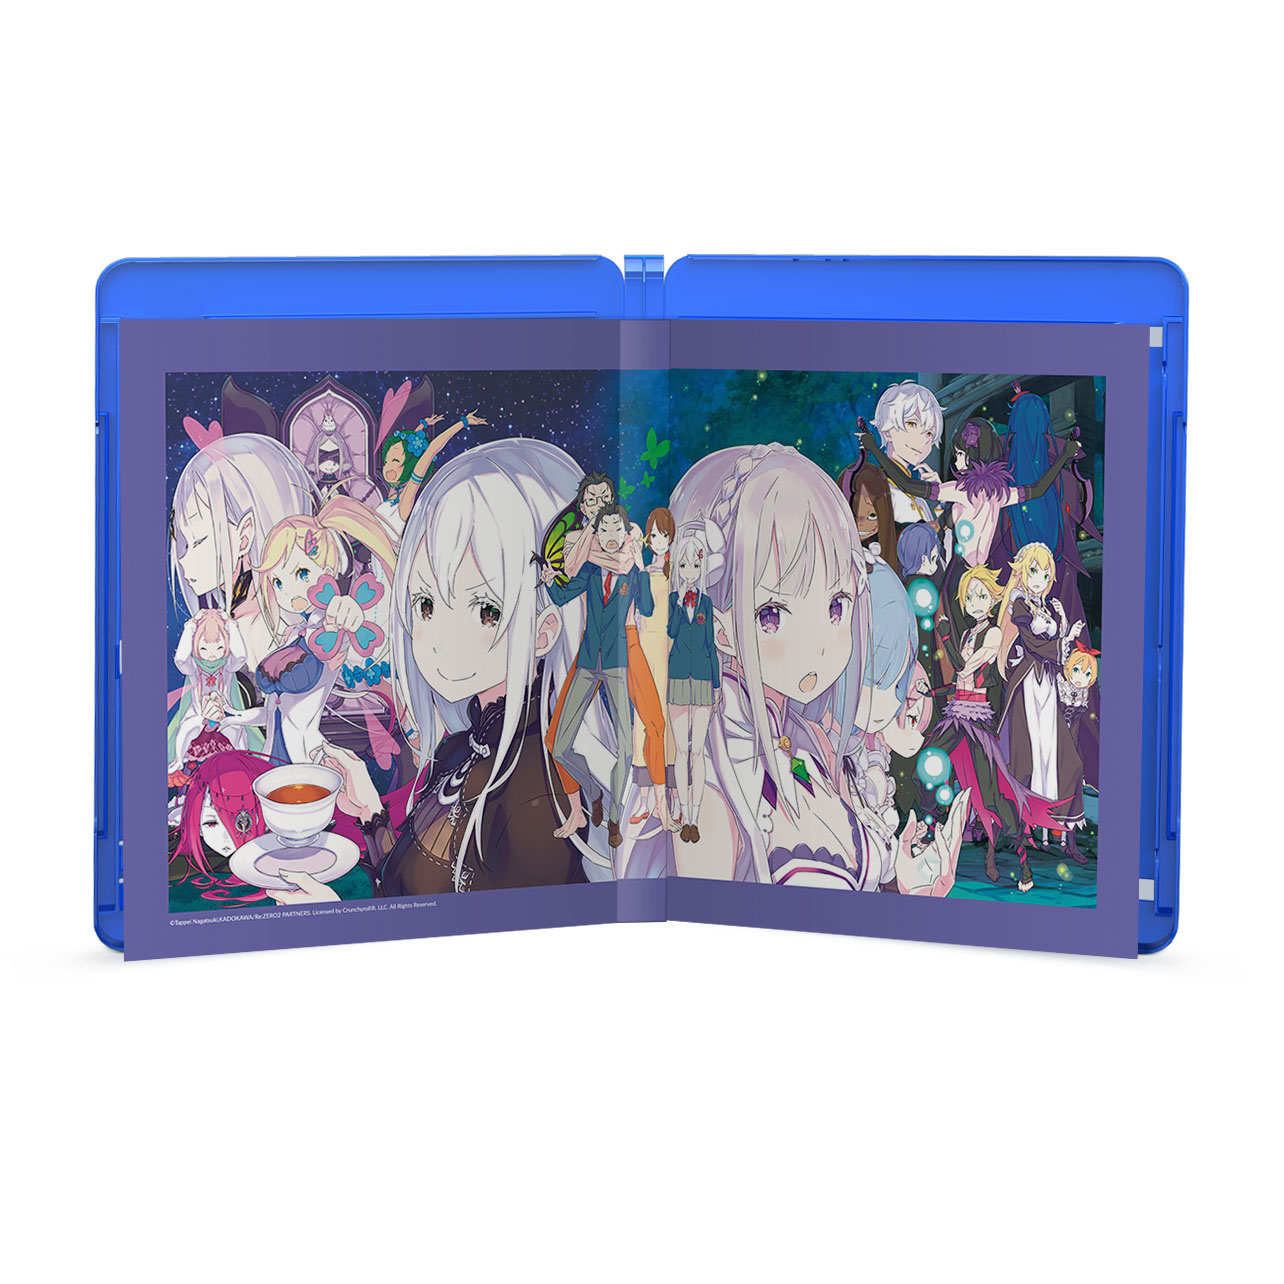 Re:ZERO -Starting Life in Another World- Season 2 - Blu-ray - Limited Edition image count 5